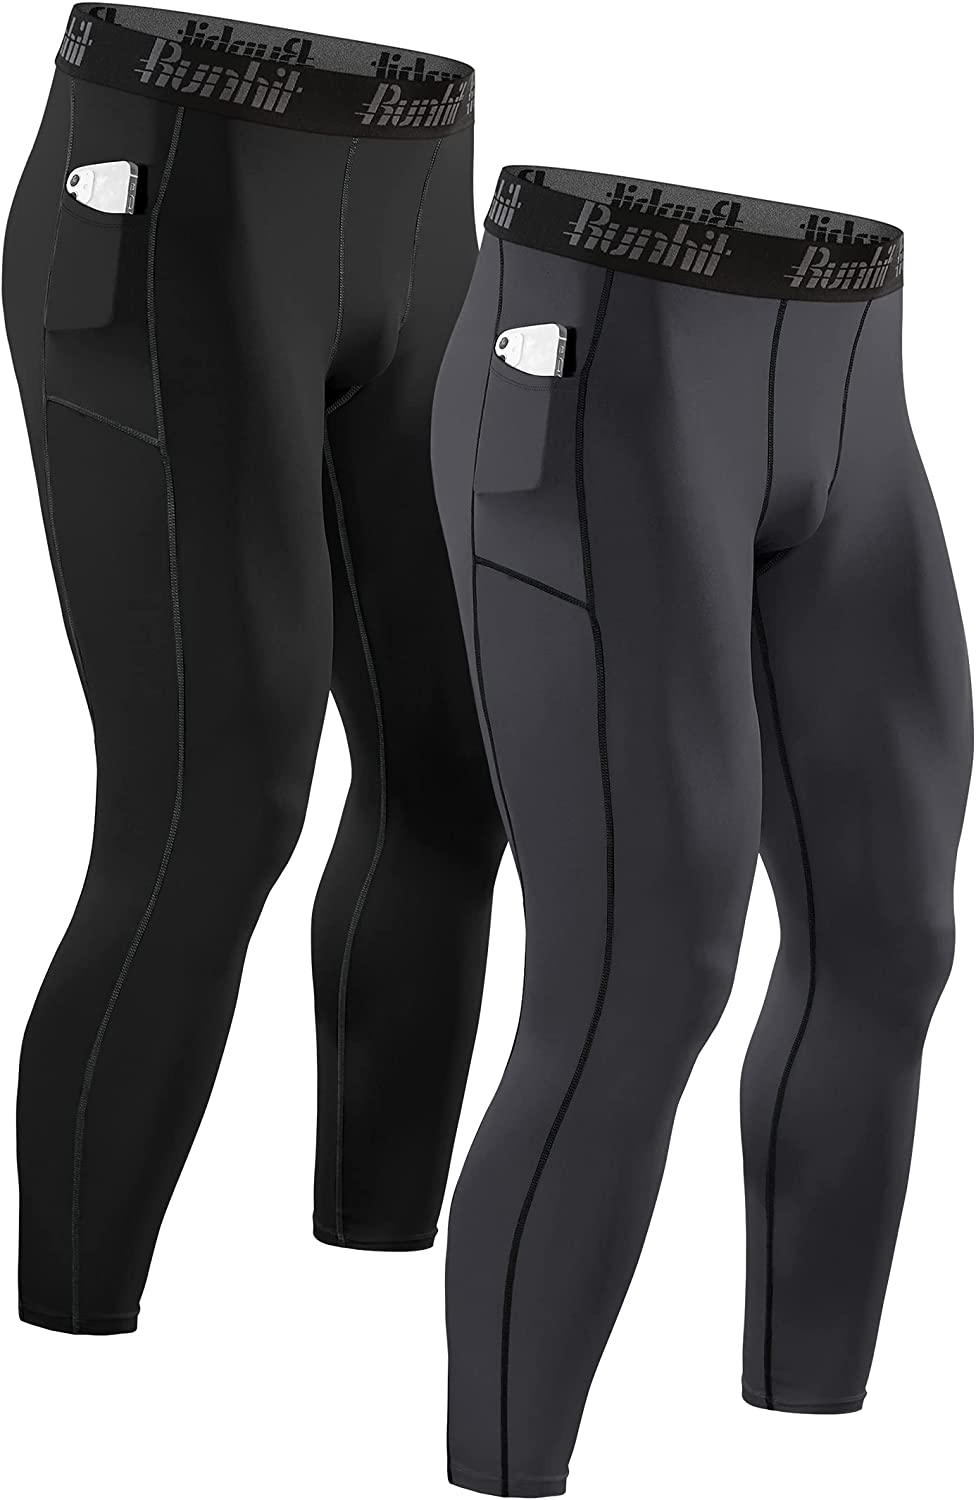 Running Tights With Pockets